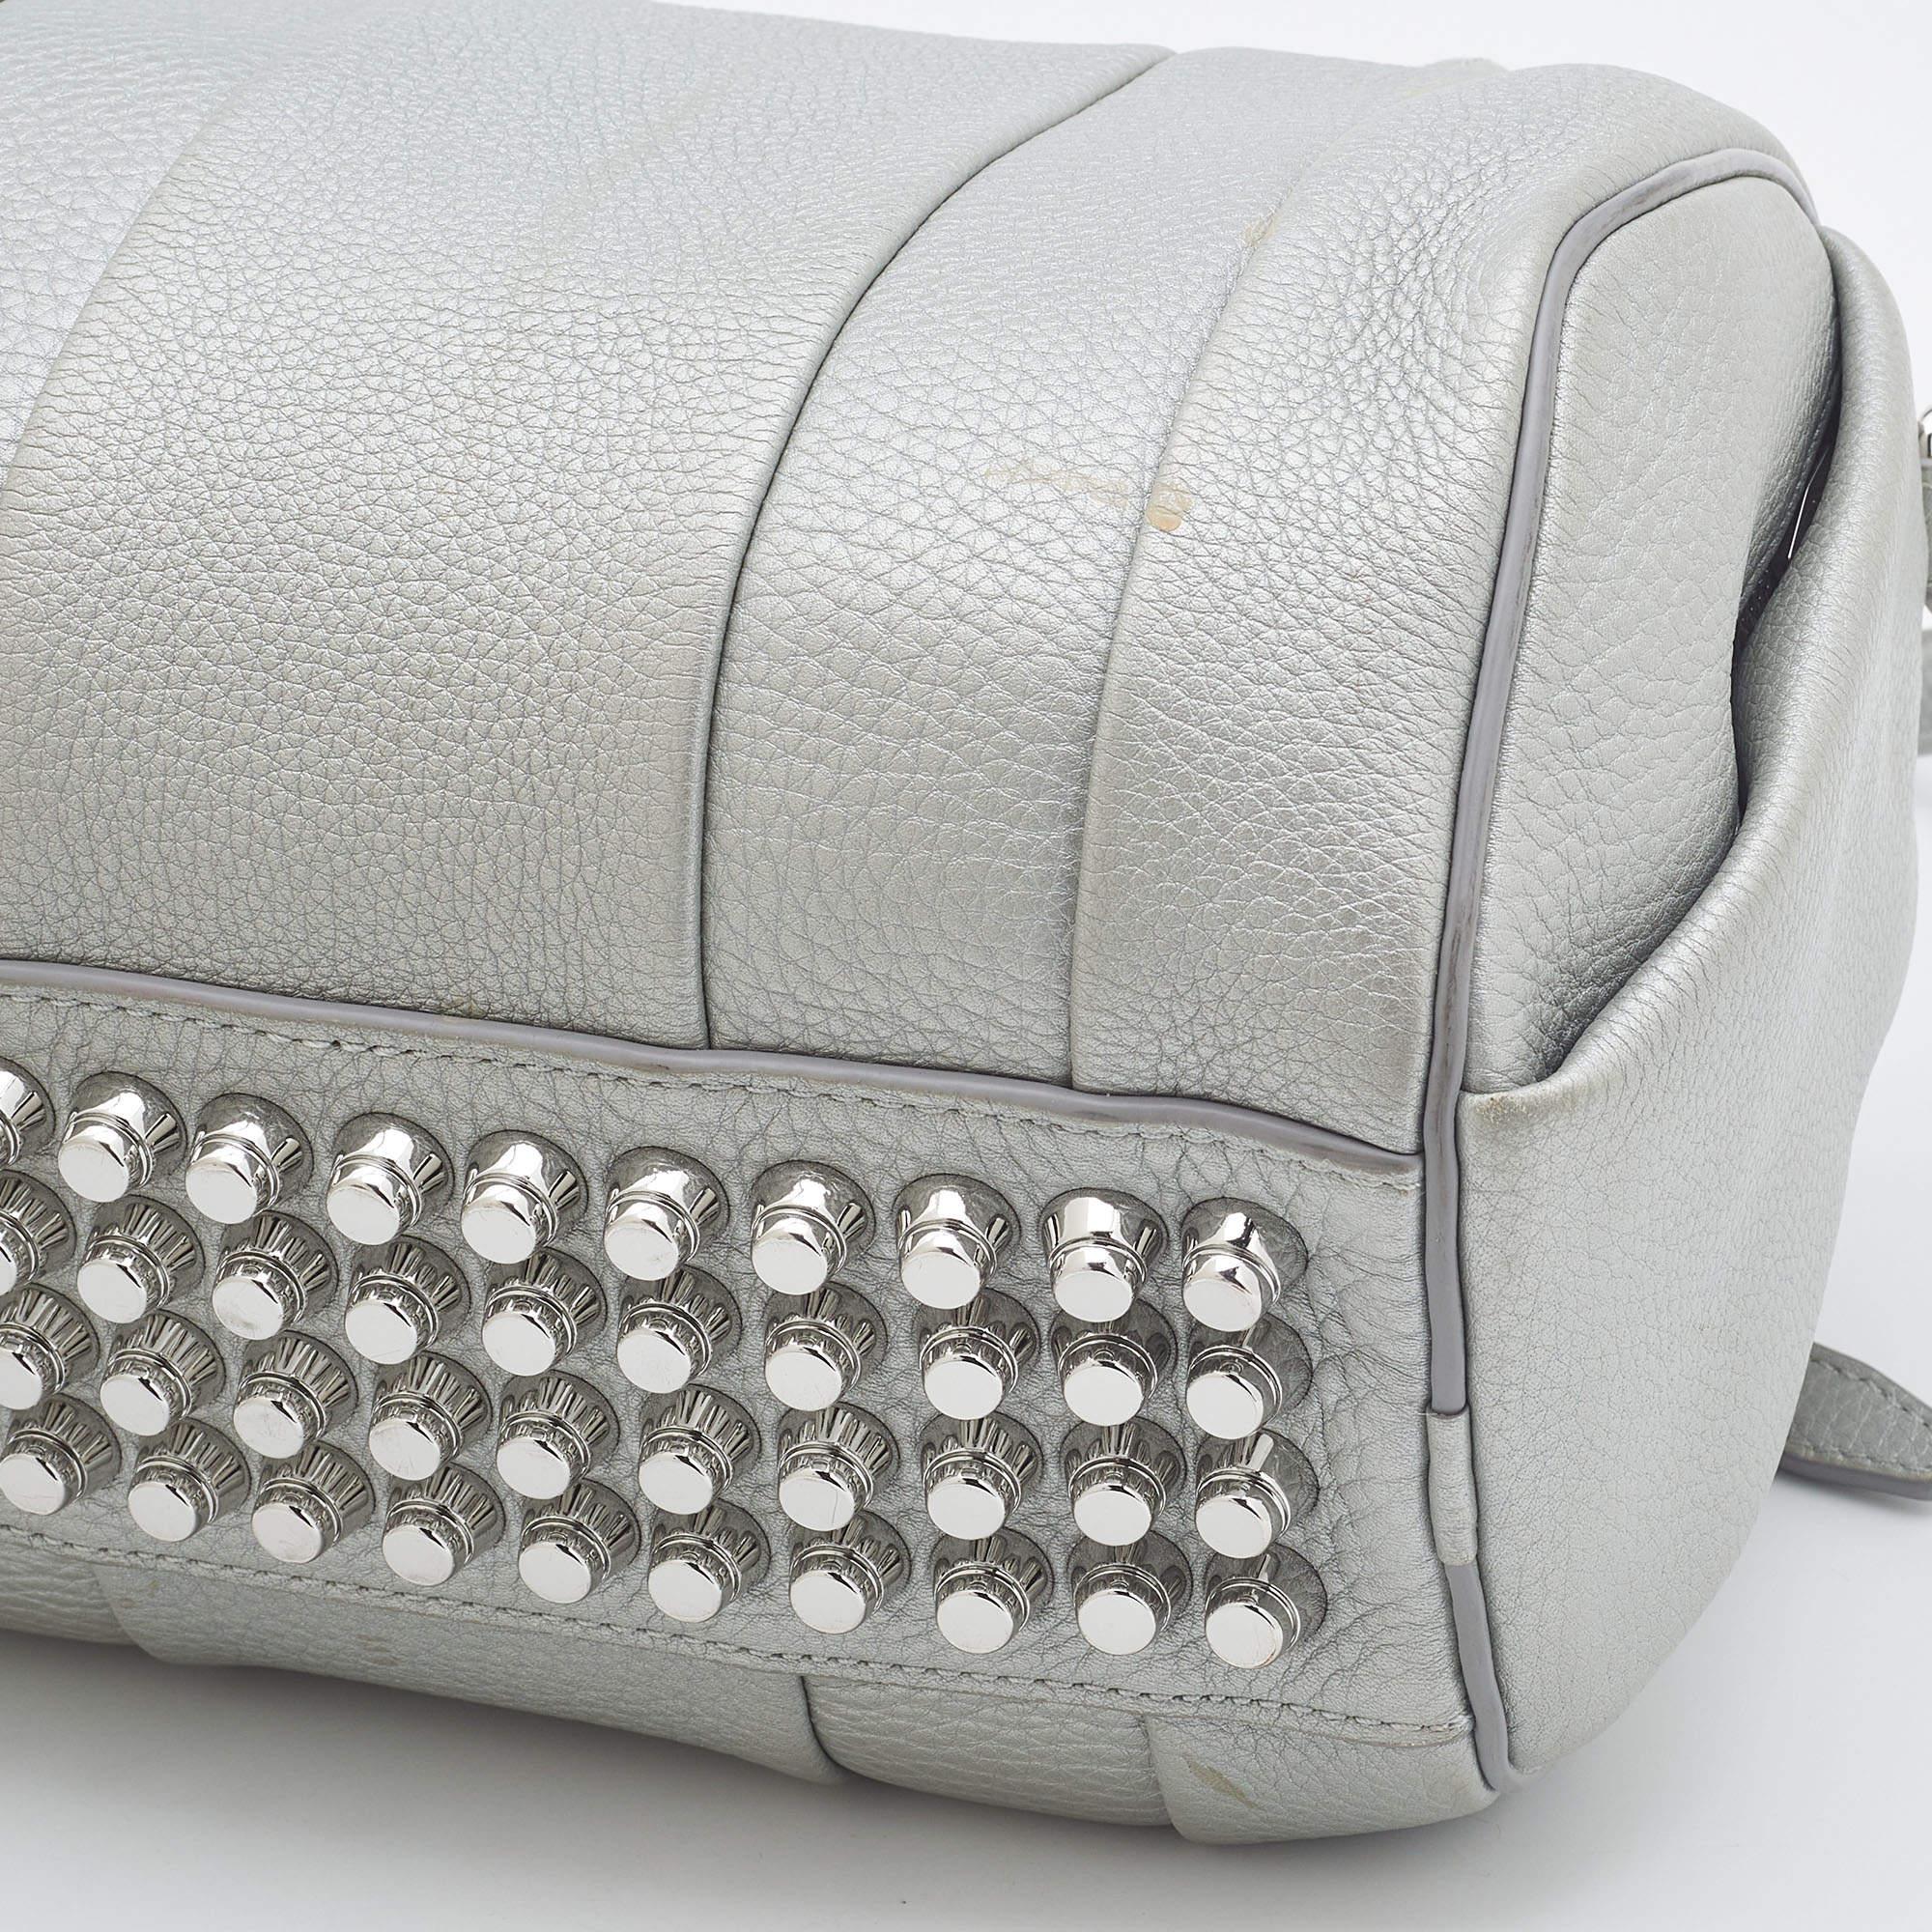 Alexander Wang Silver Textured Leather Rocco Bag 5